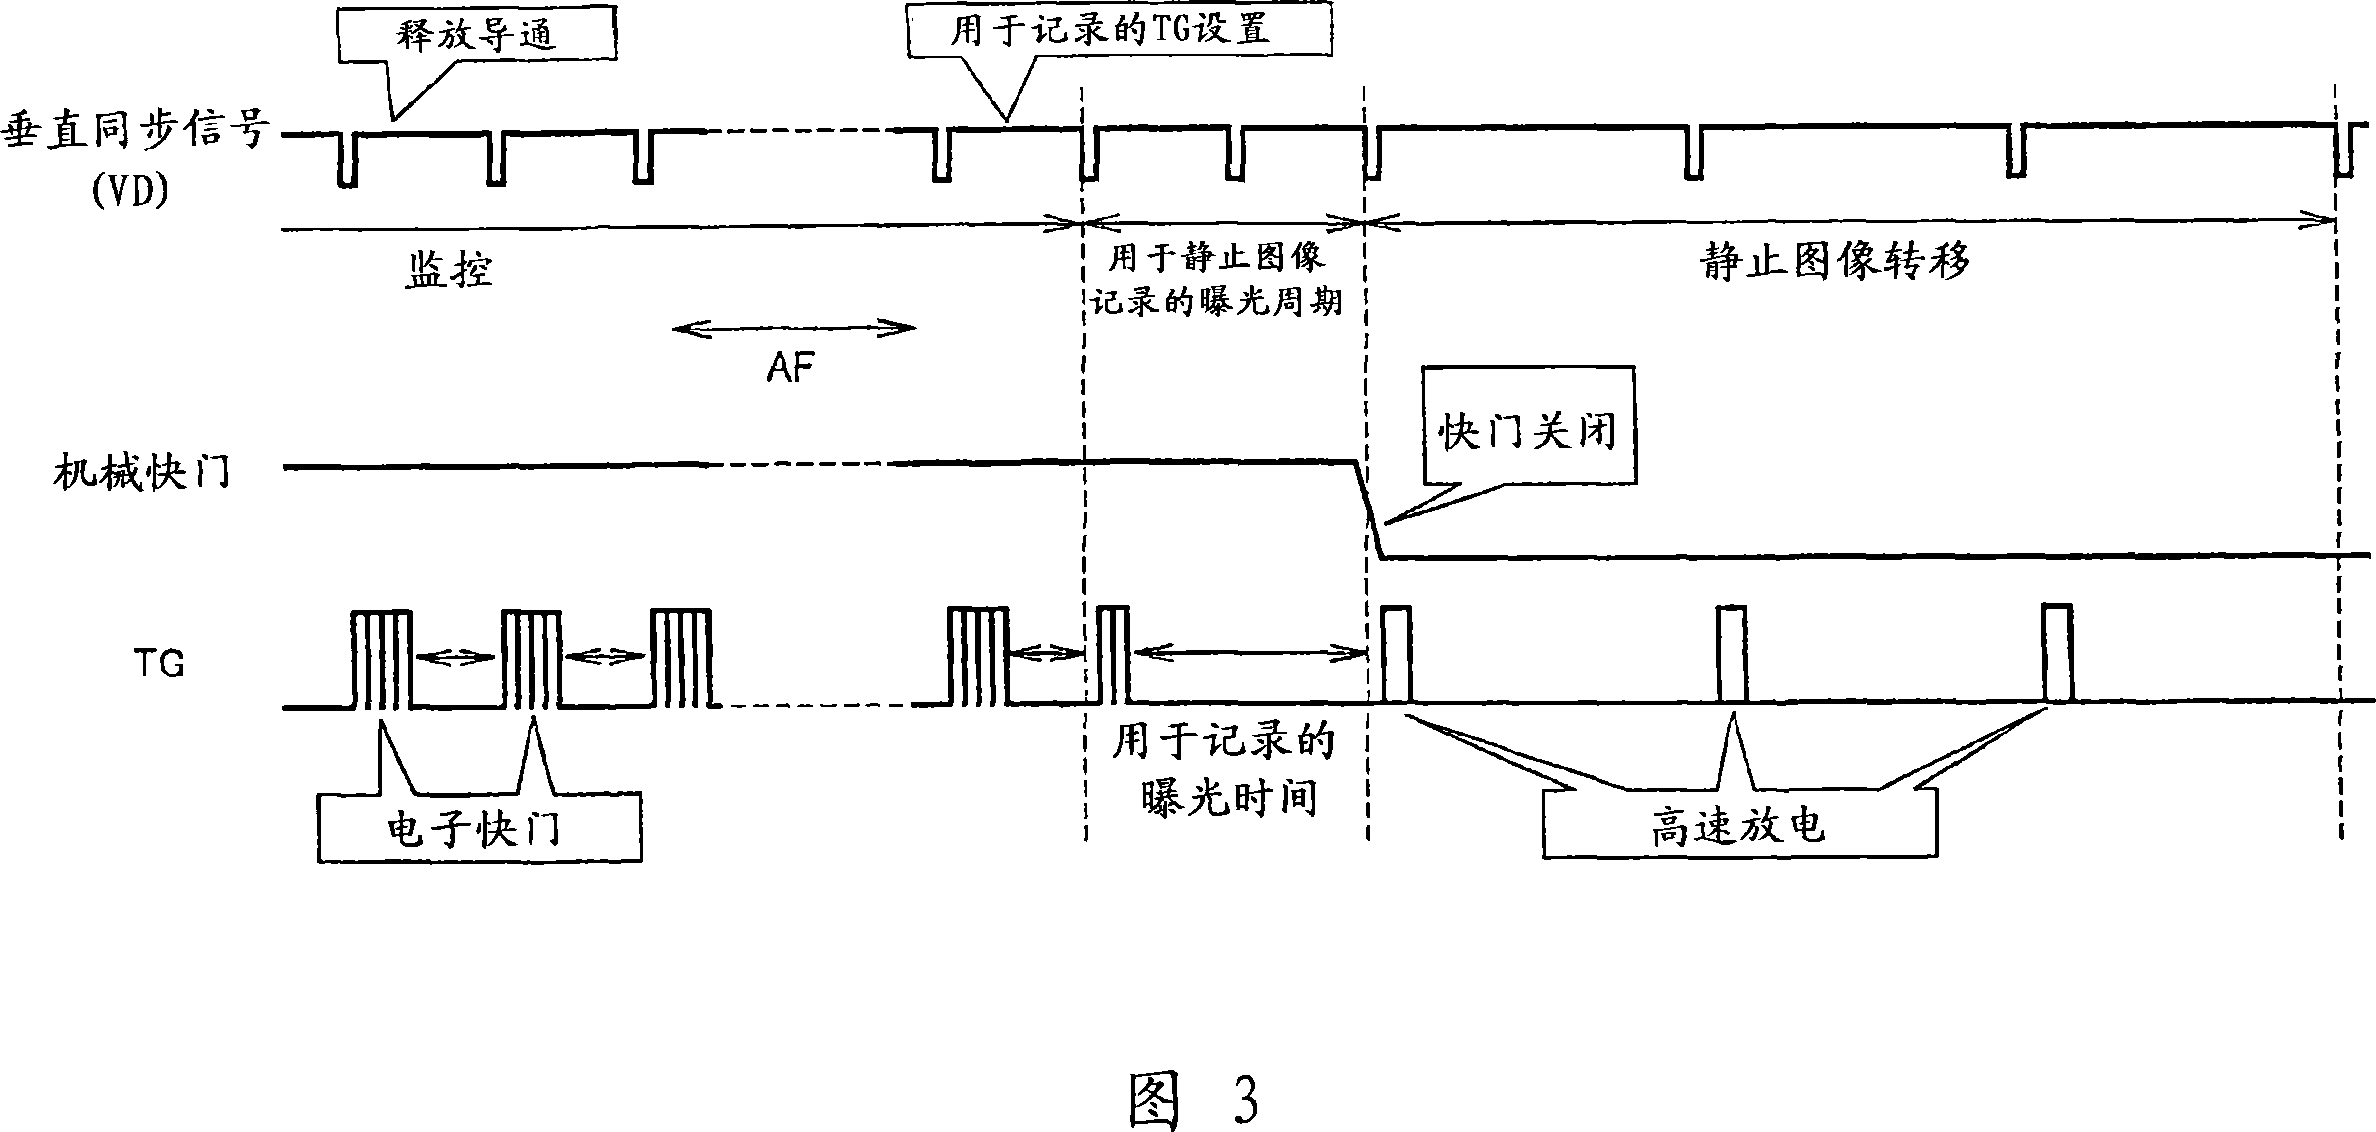 Imaging apparatus, imaging control method and recording medium readable by computer